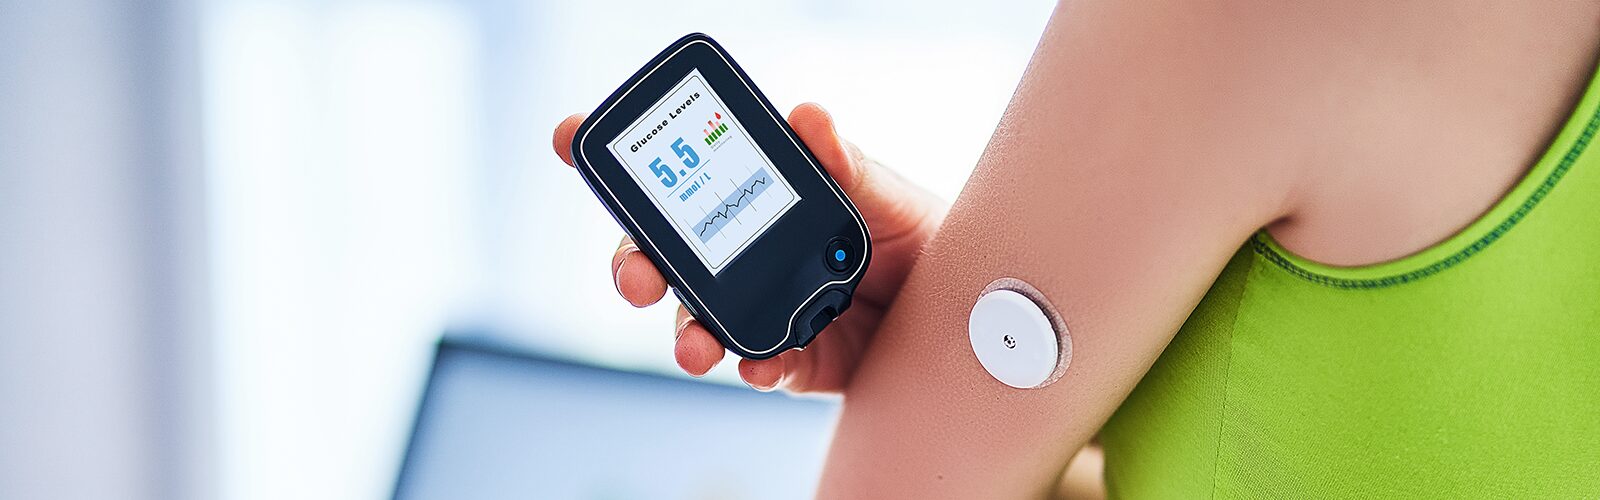 Continuous Glucose Monitoring Market